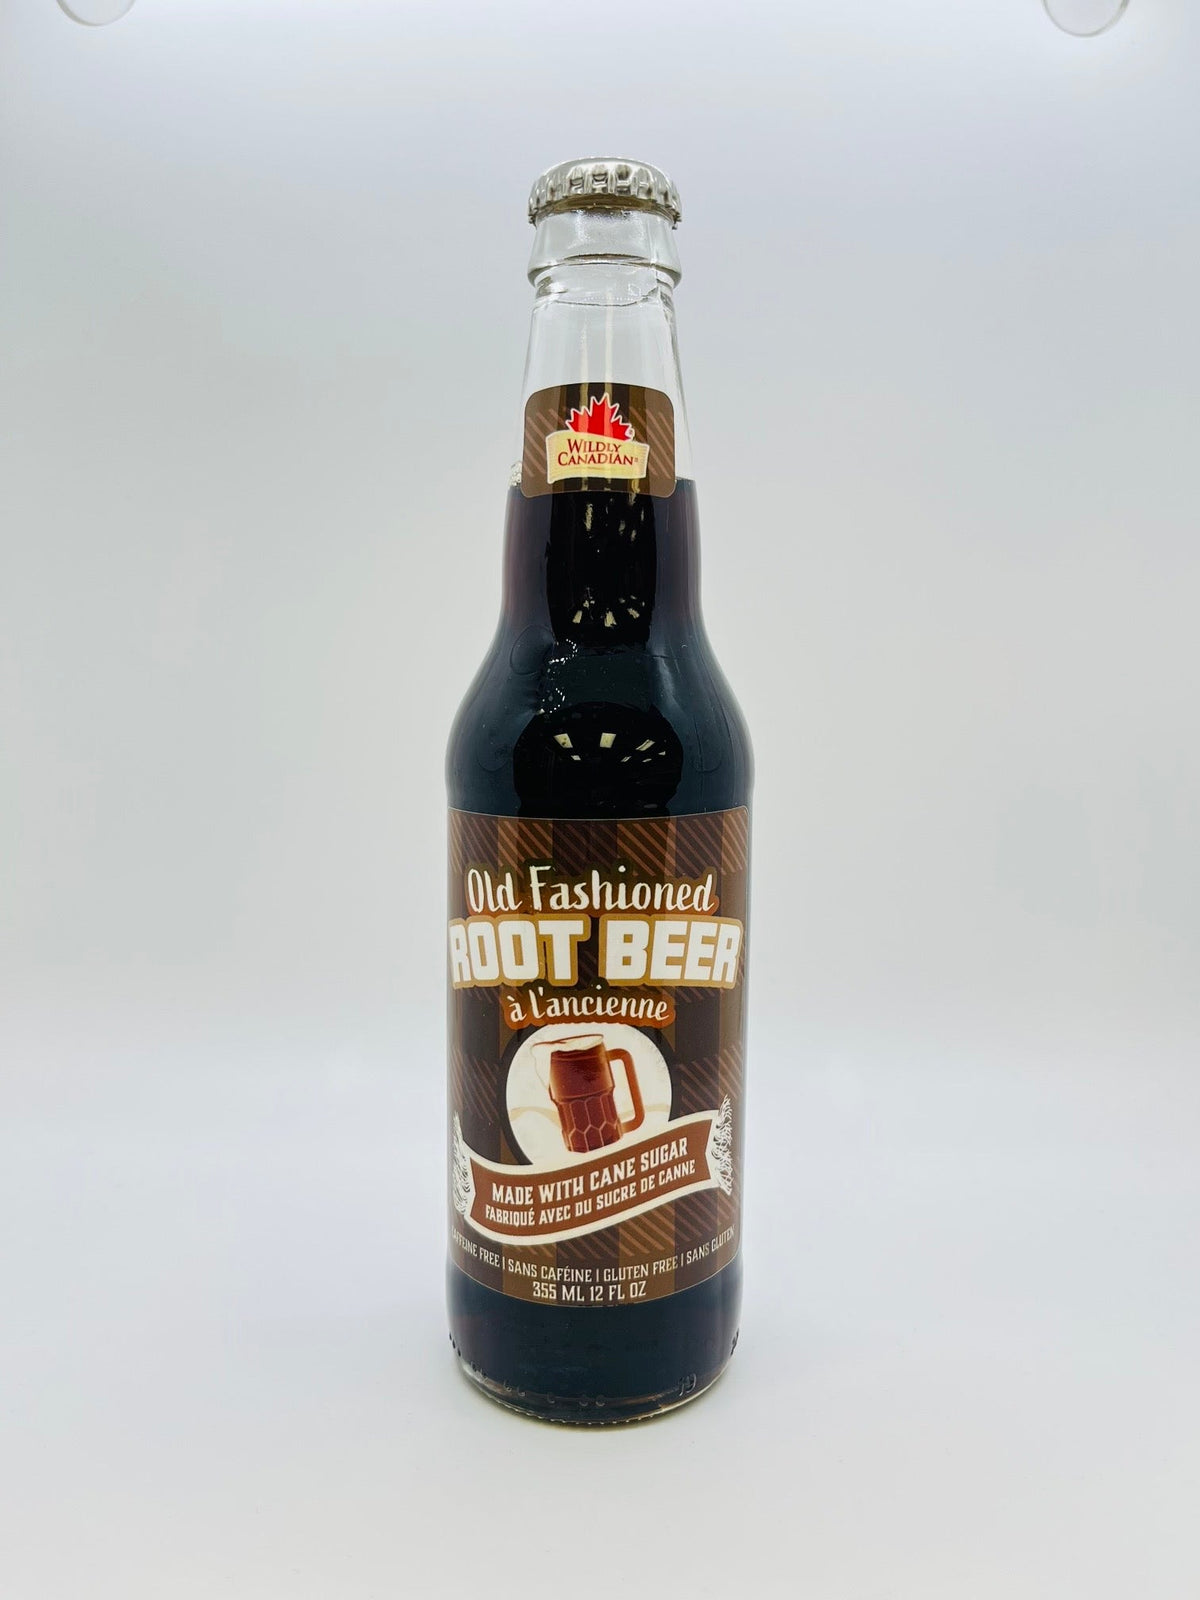 Old Fashioned Root Beer